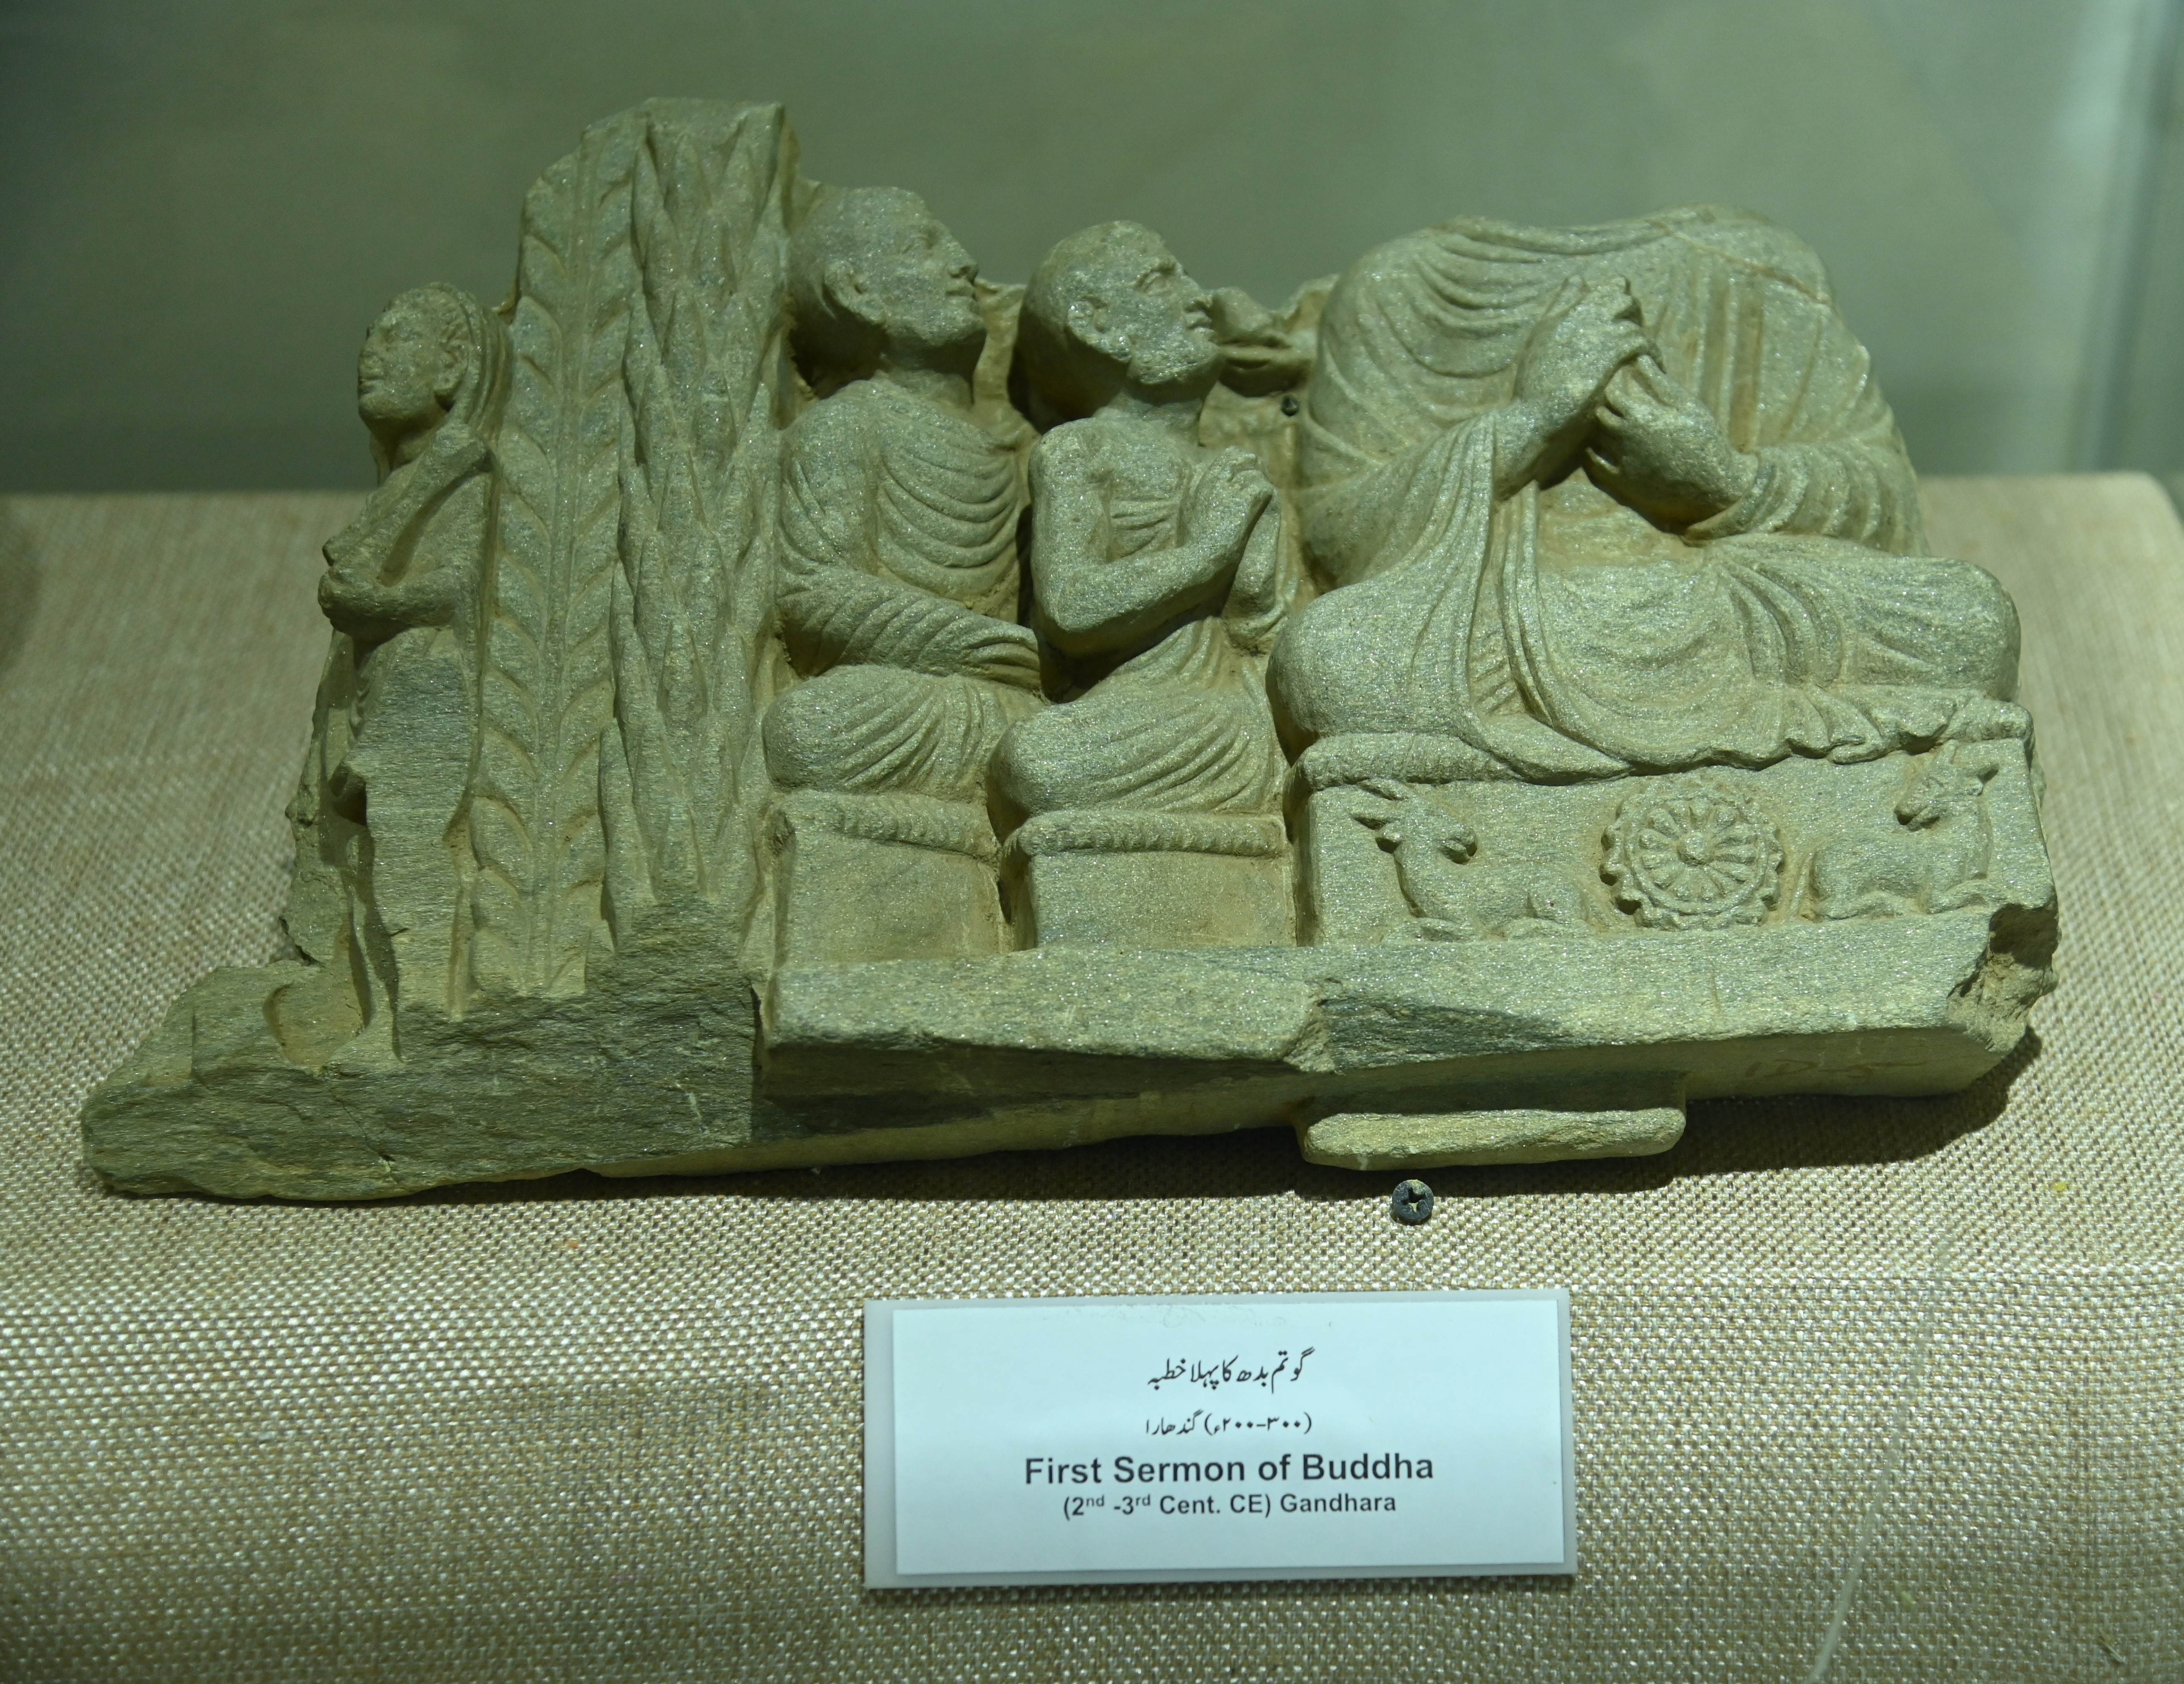 The Artifact depicting the First Sermon of Buddha